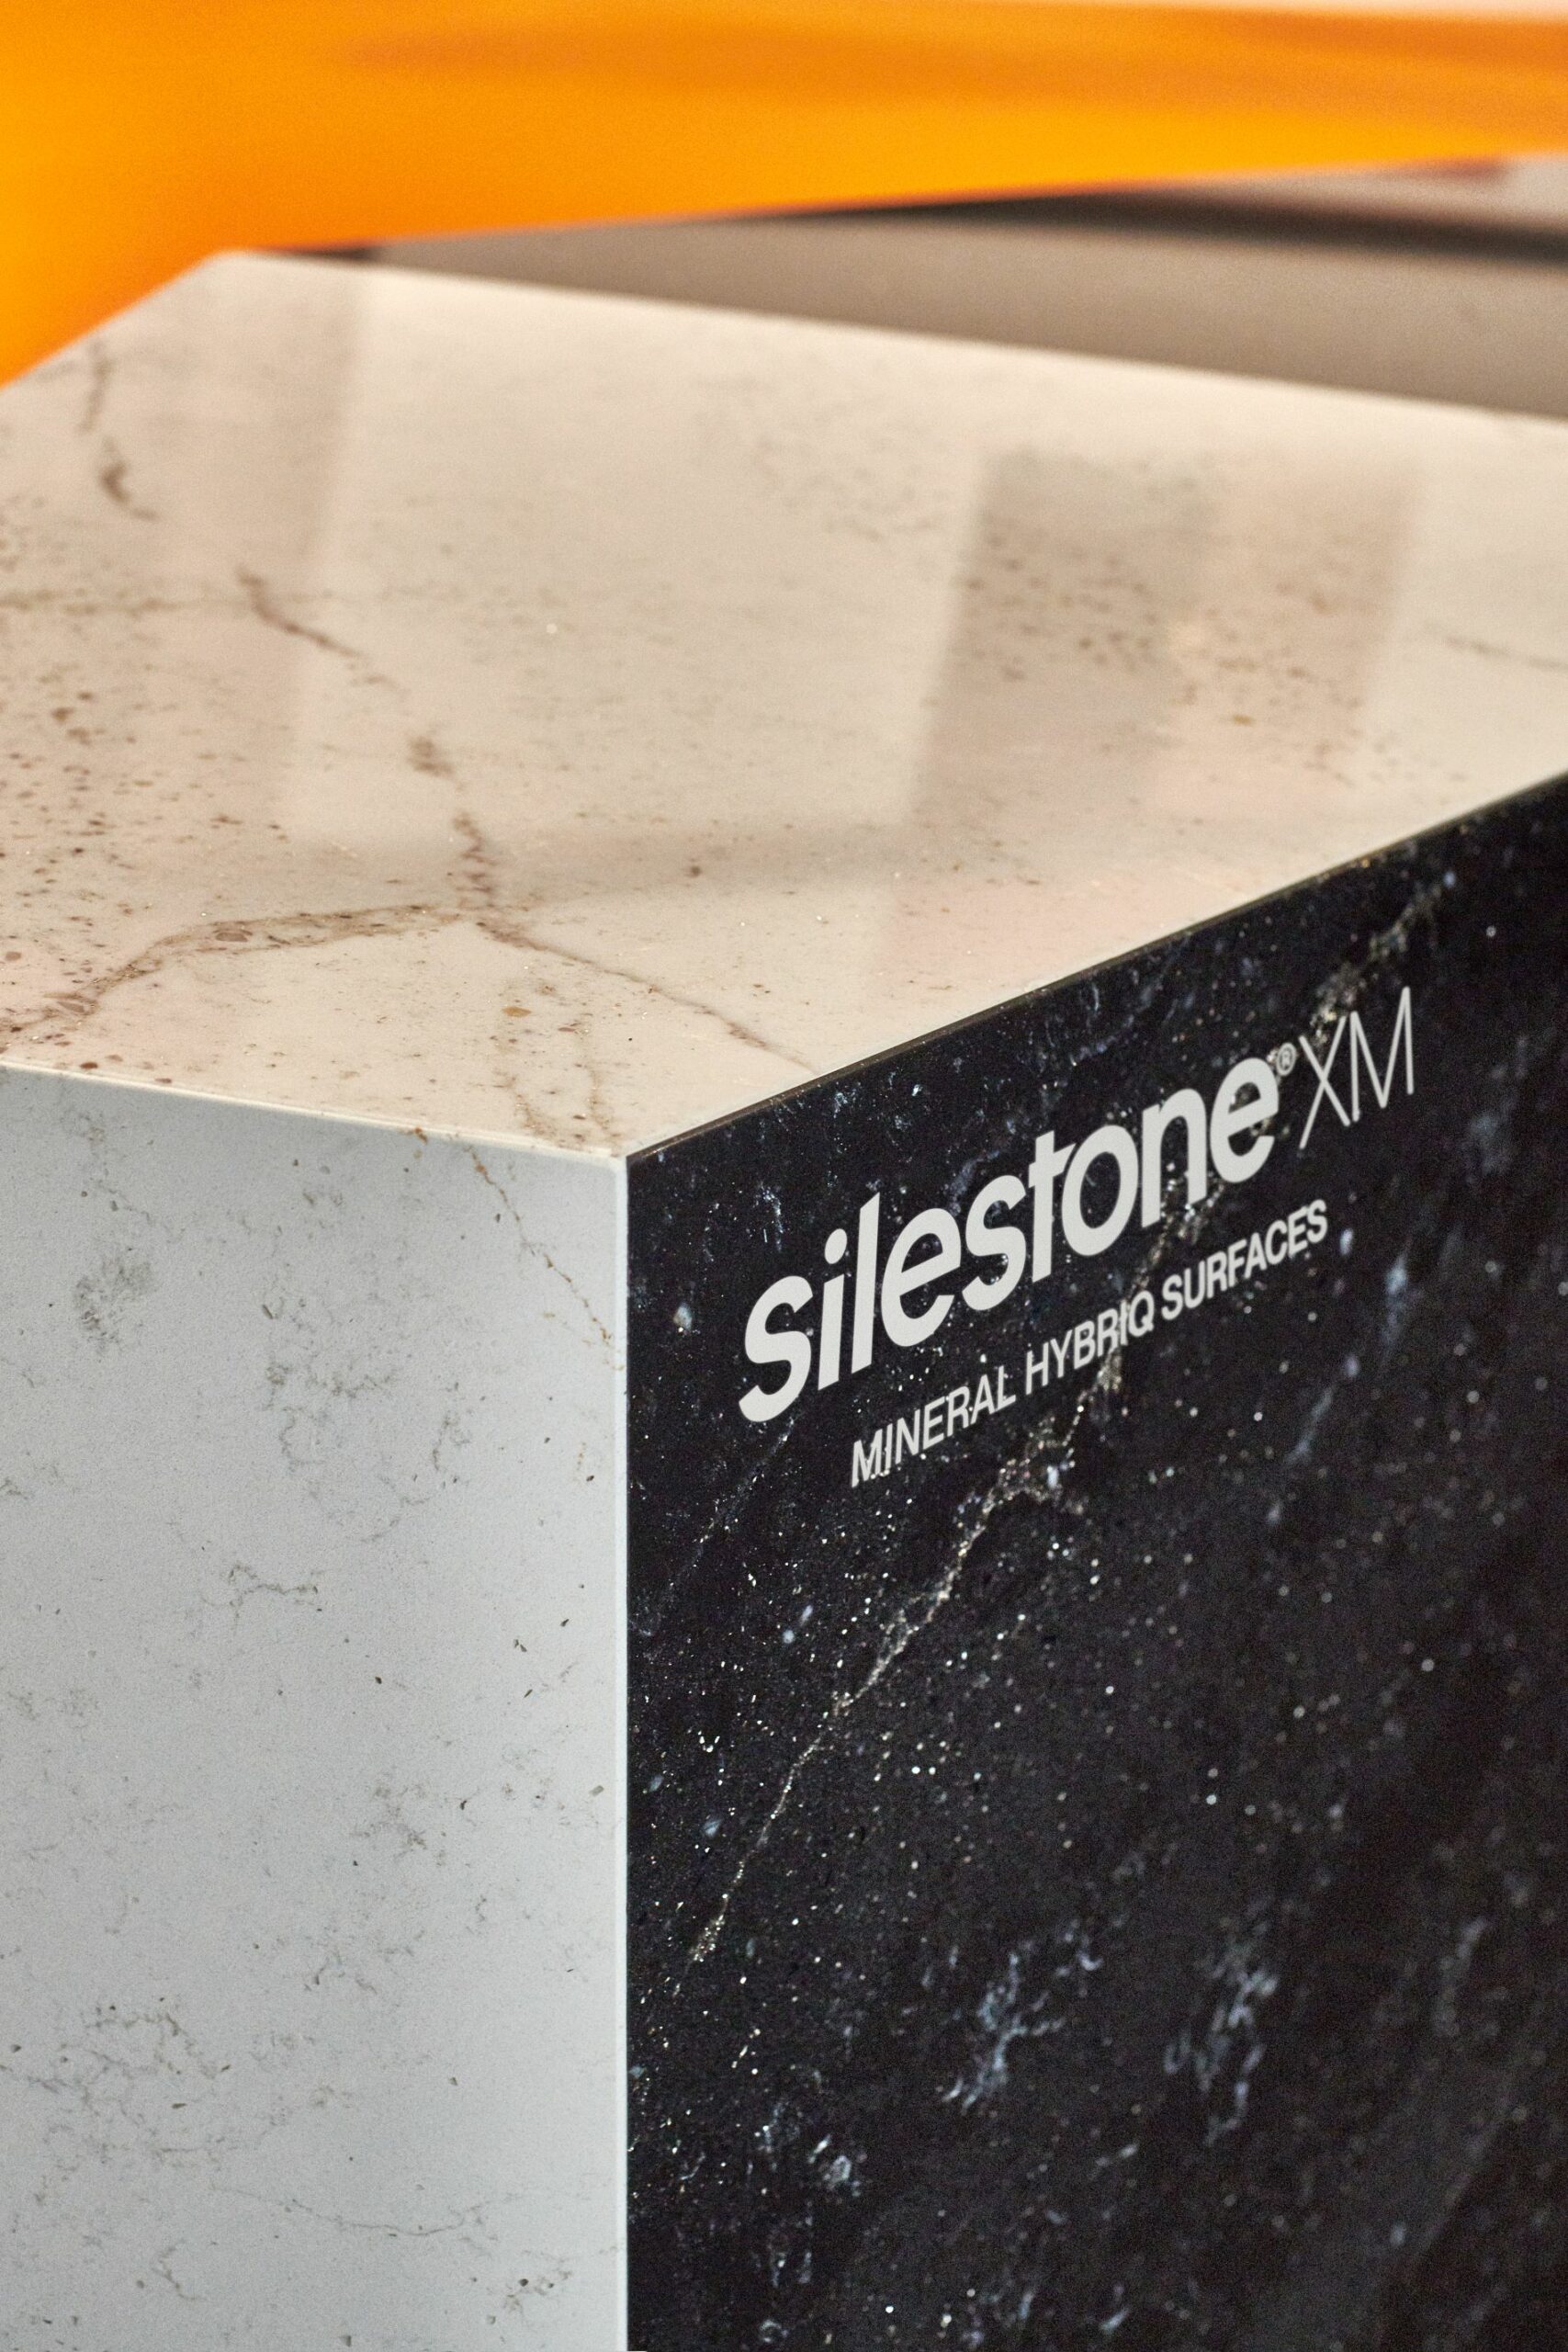 Image of cosentino arco 004 LGC 6955 1 scaled in ARCOmadrid 2024 brings out Silestone’s most artistic side - Cosentino